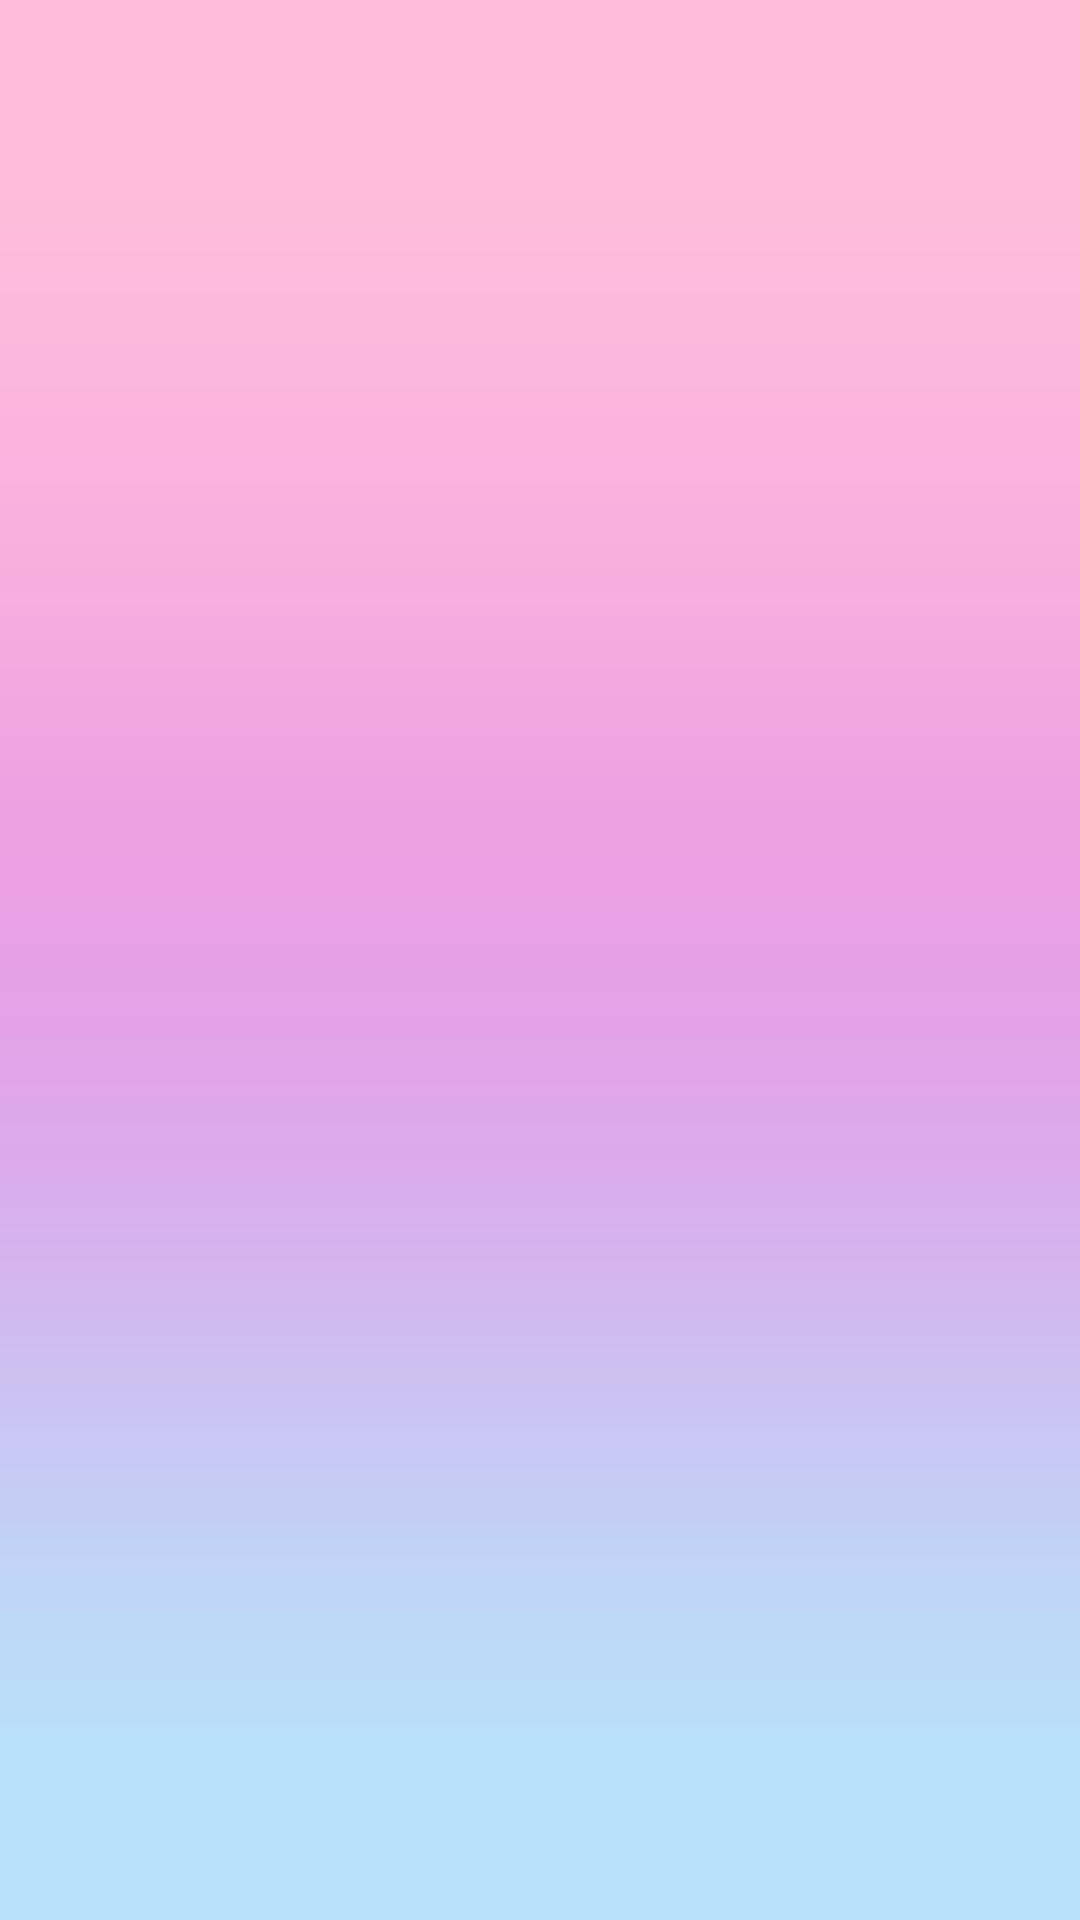 Cute Pastel Colors Abstract Design